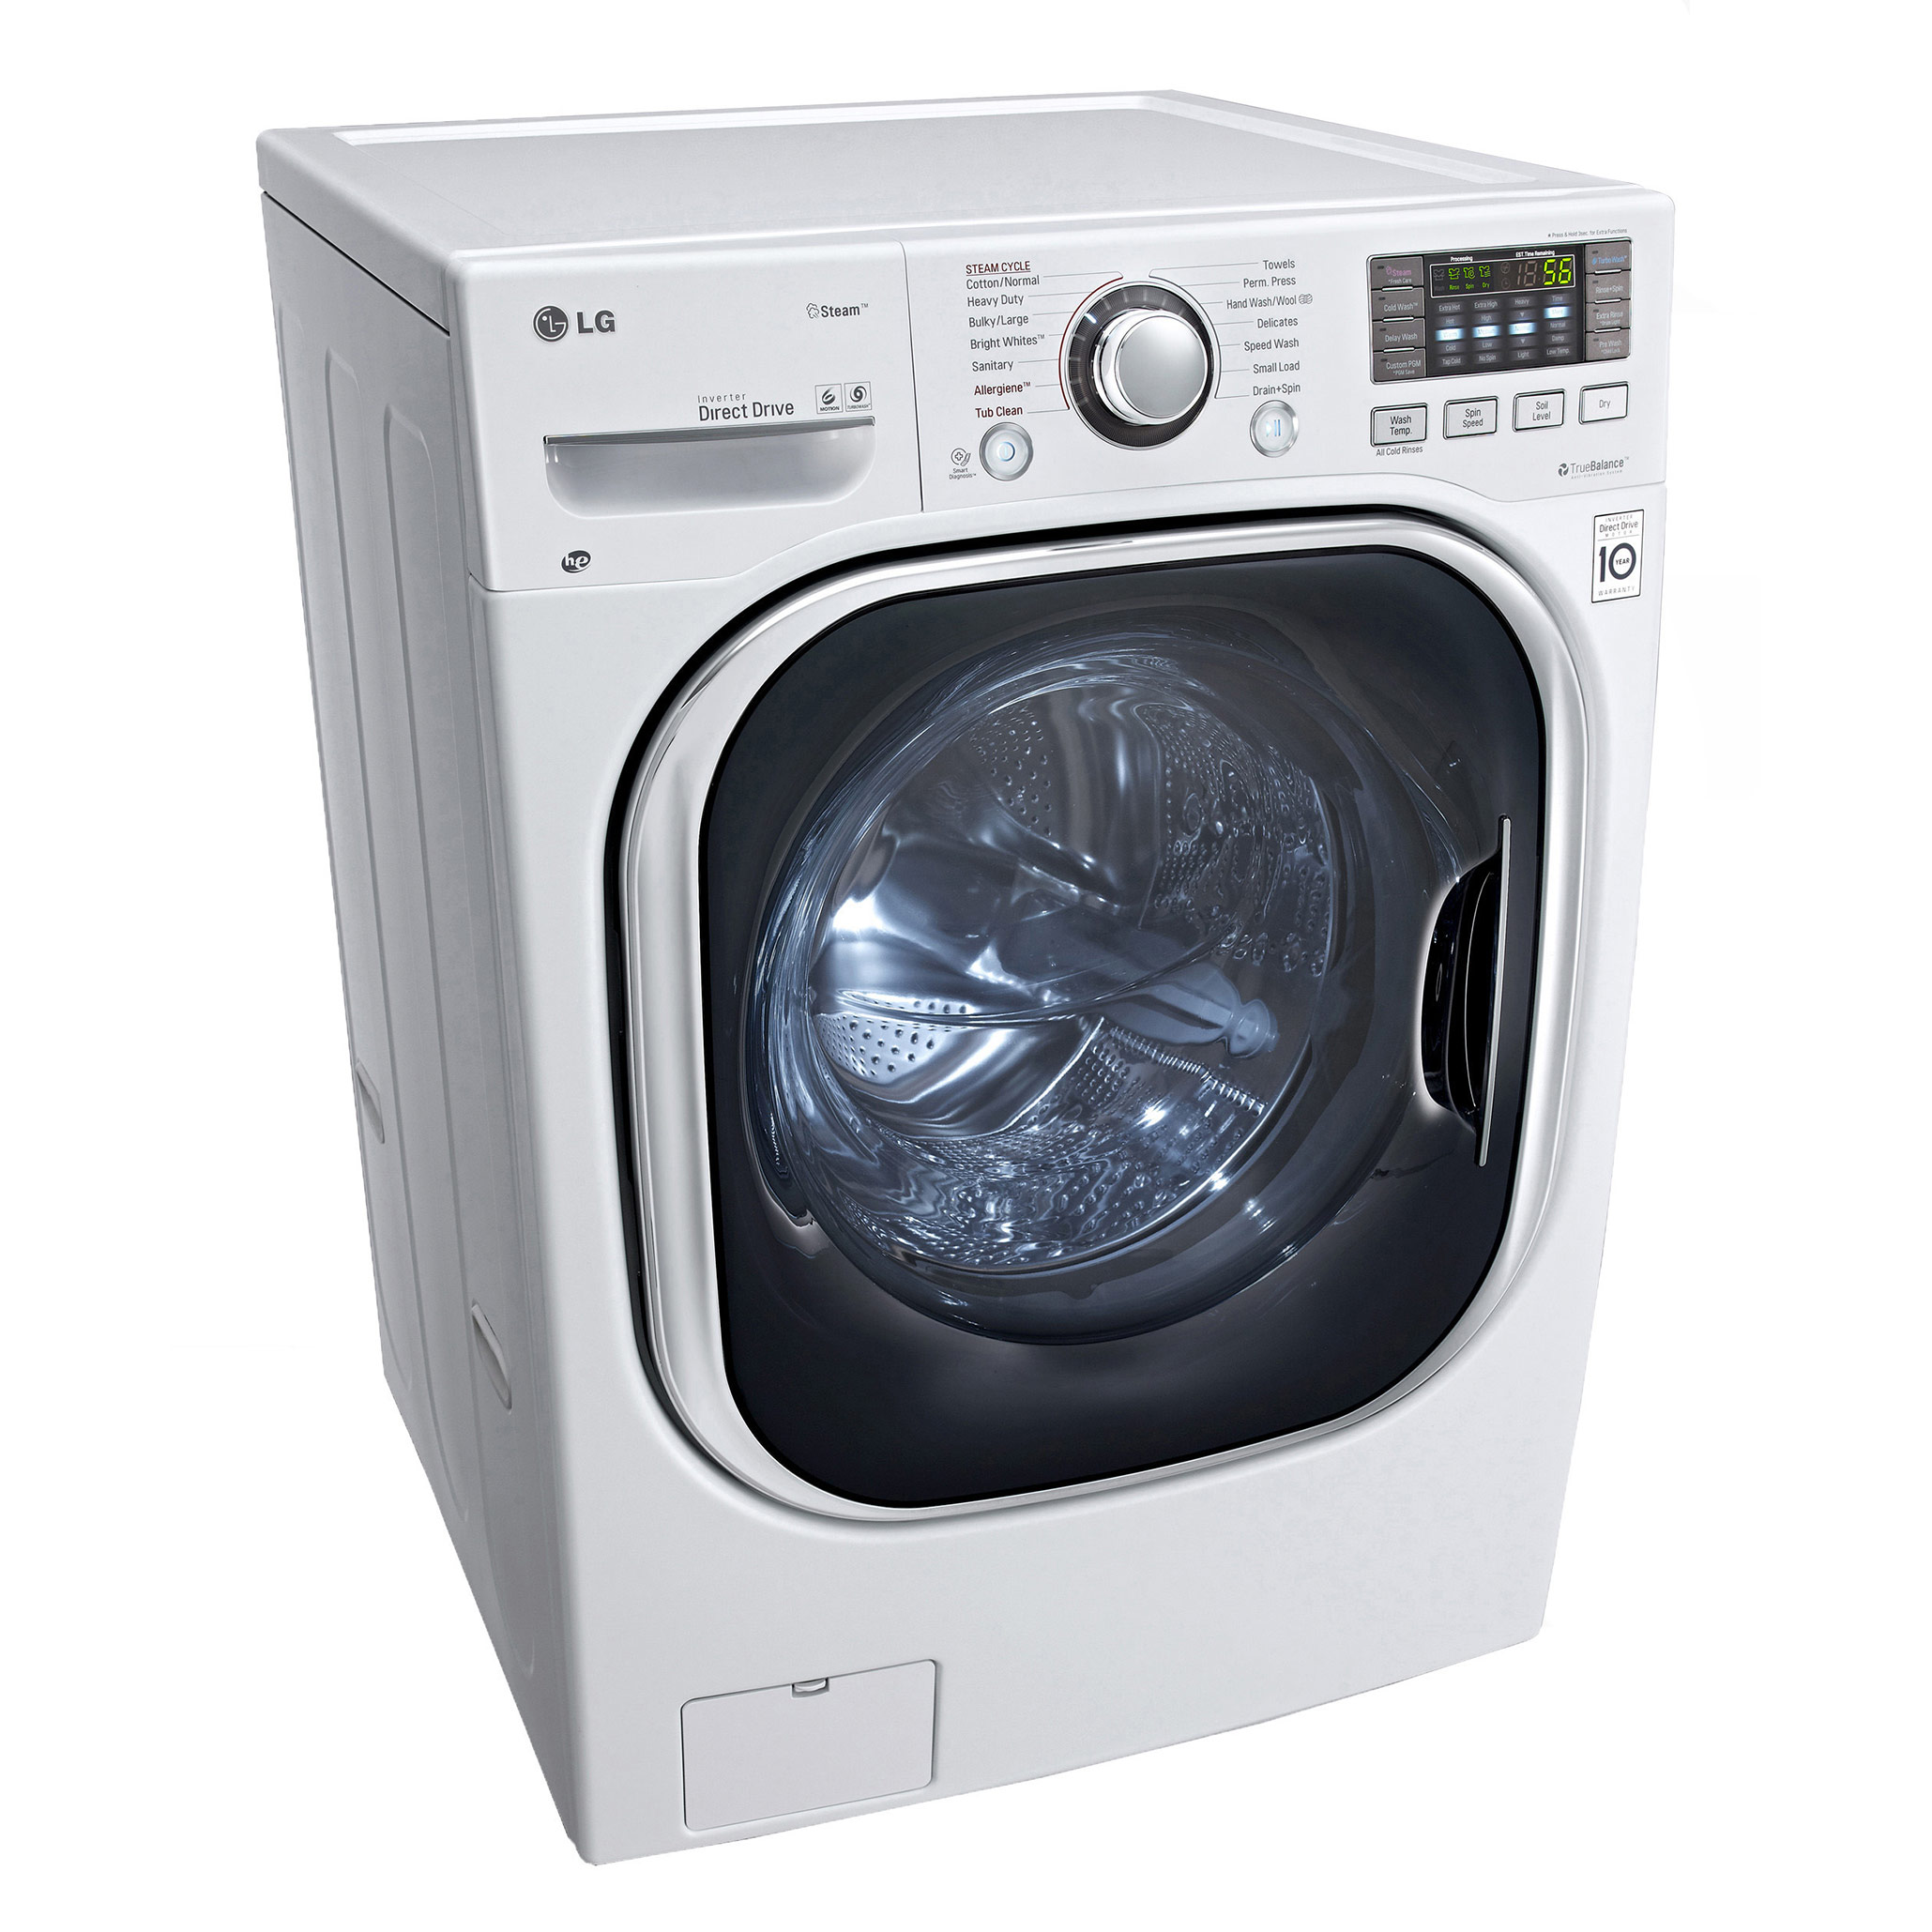 LG WM3997HWA | All in One Washer Dryer Combo | LGWasherDryer.com All In One Washer Dryer Ventless Reviews